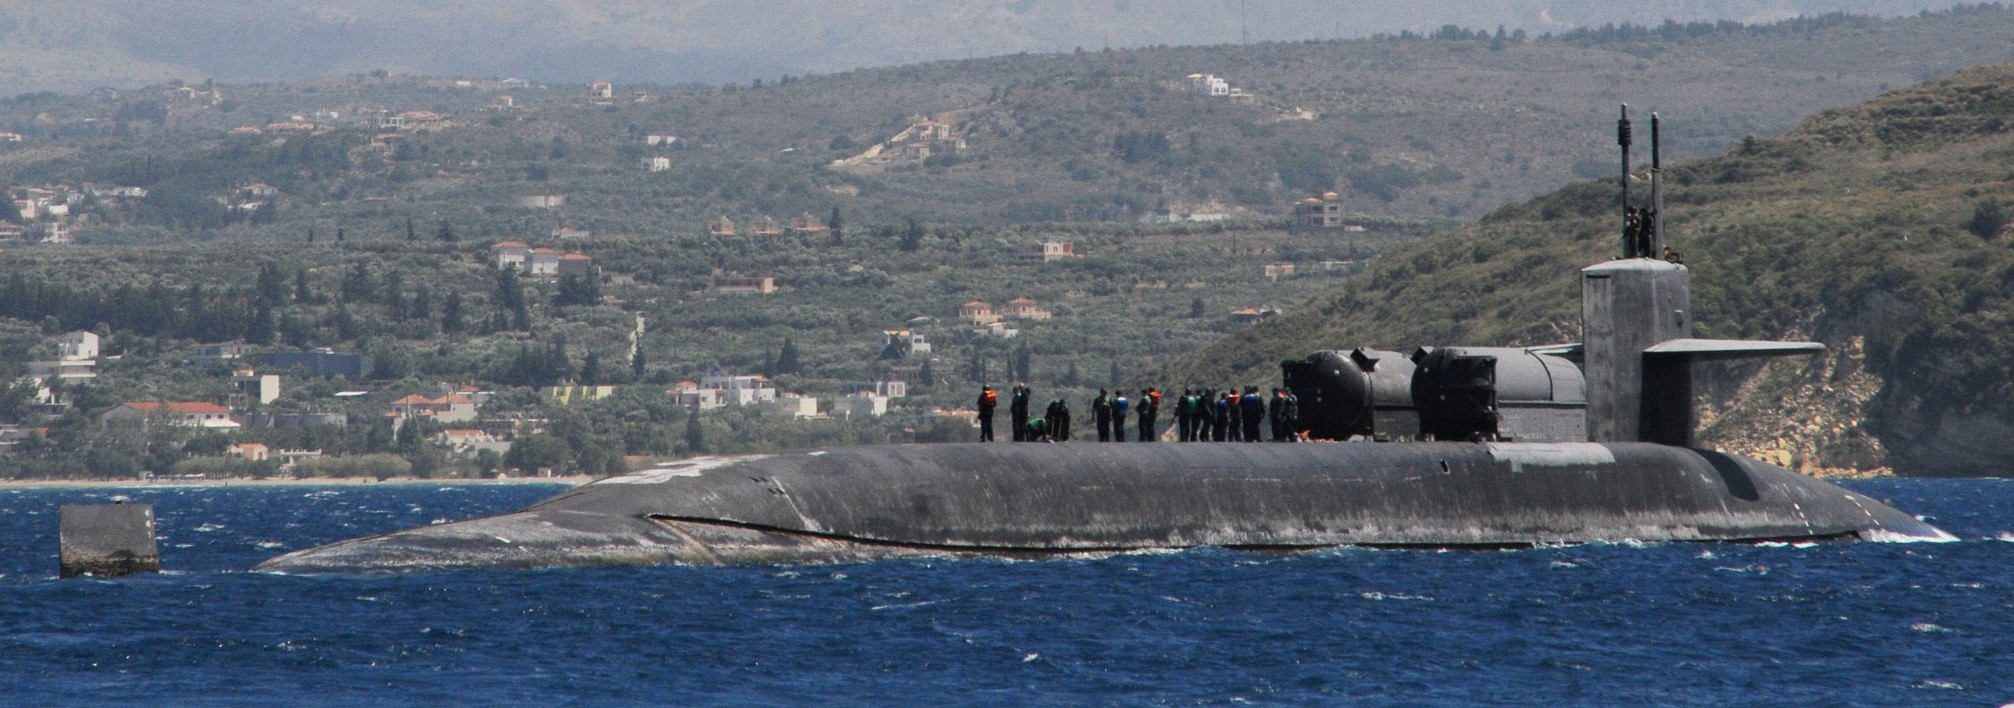 ssgn-728 uss florida guided missile submarine us navy 2013 13